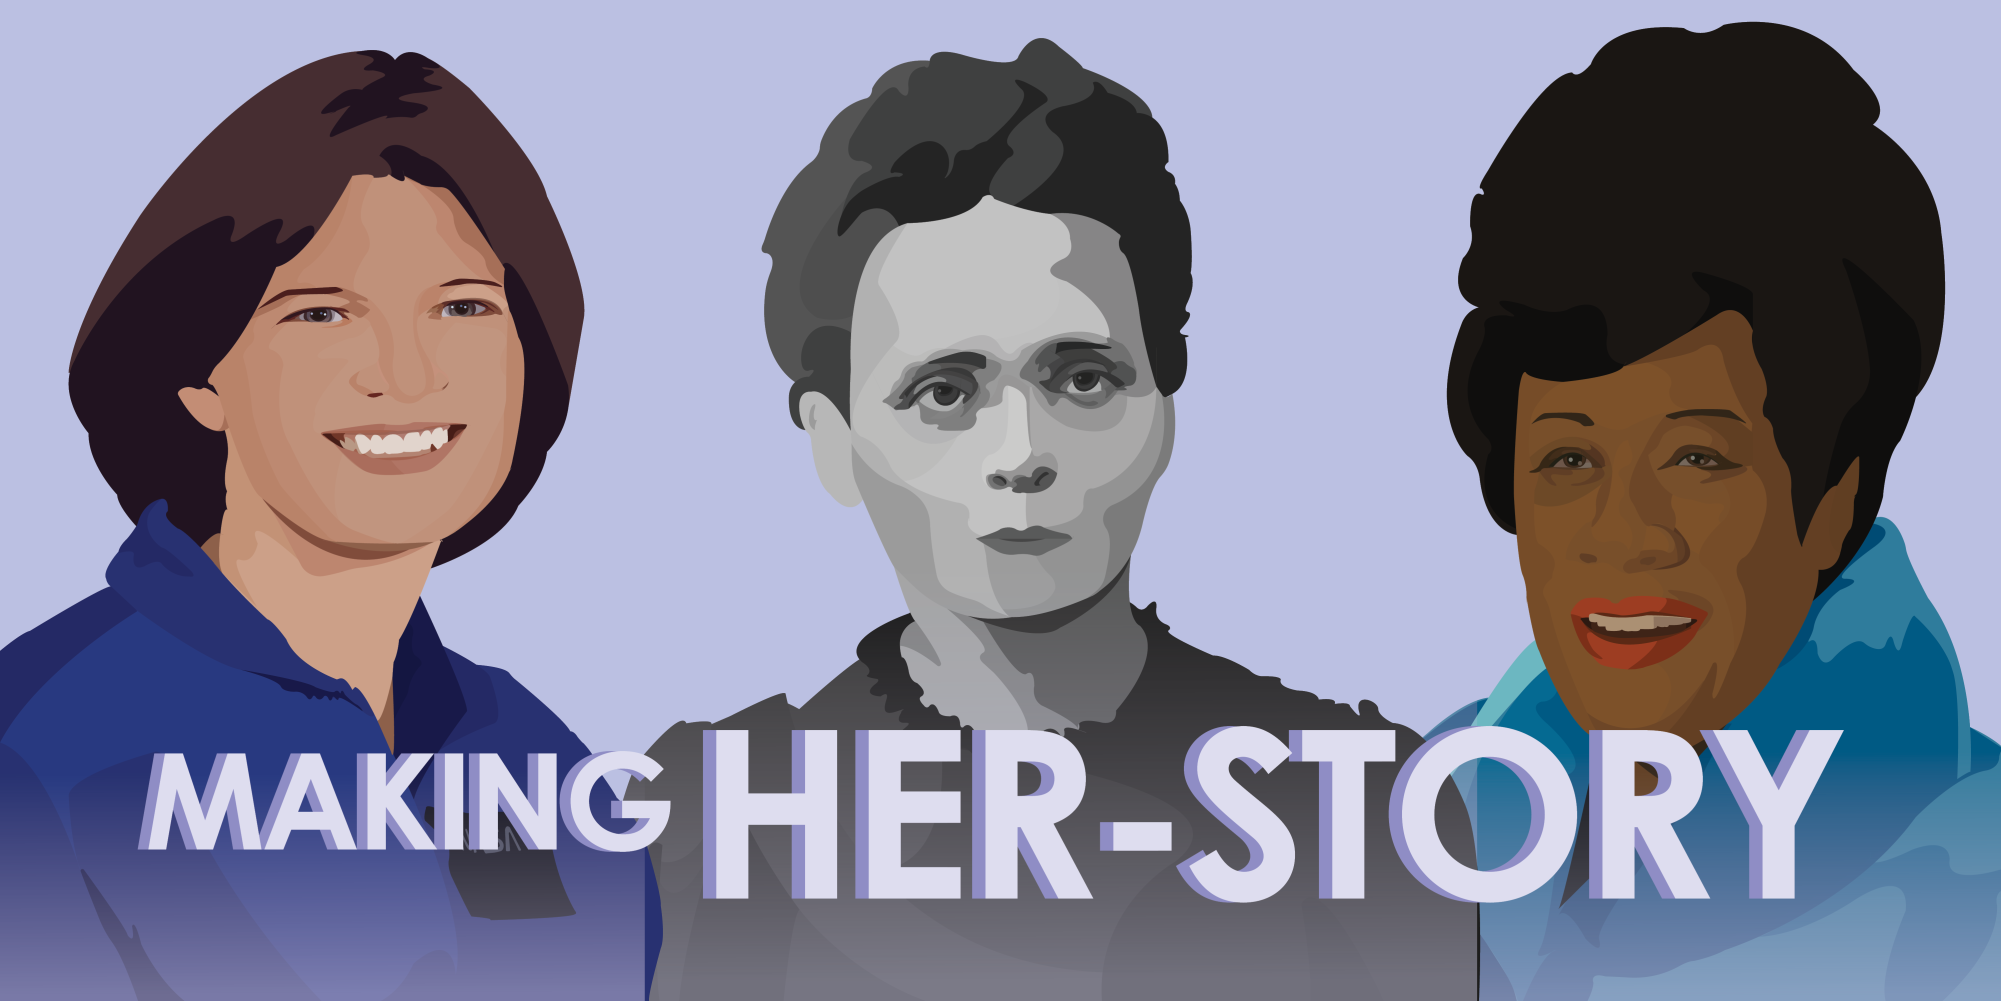 Women's Herstory Month: Nature connectors and protectors who